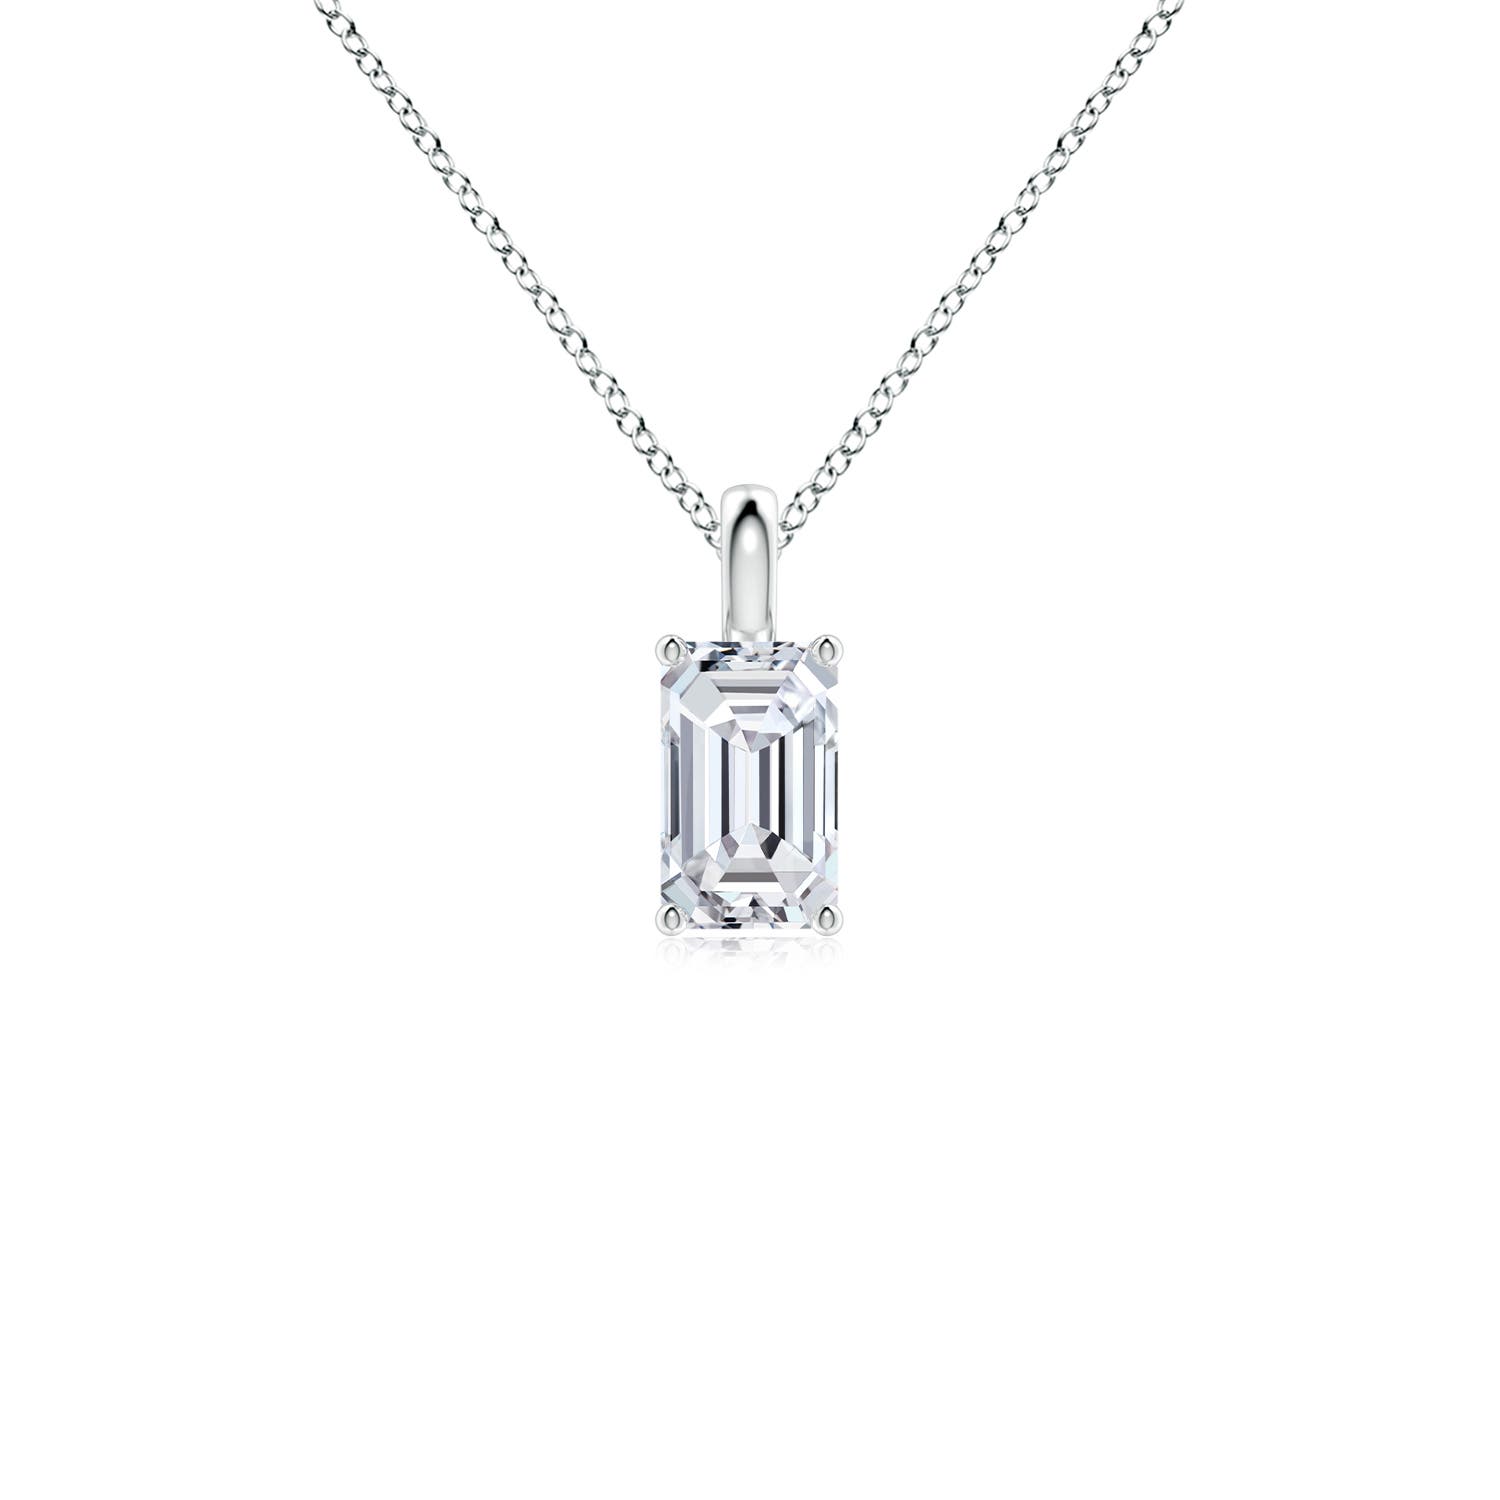 H, SI2 / 0.7 CT / 18 KT White Gold